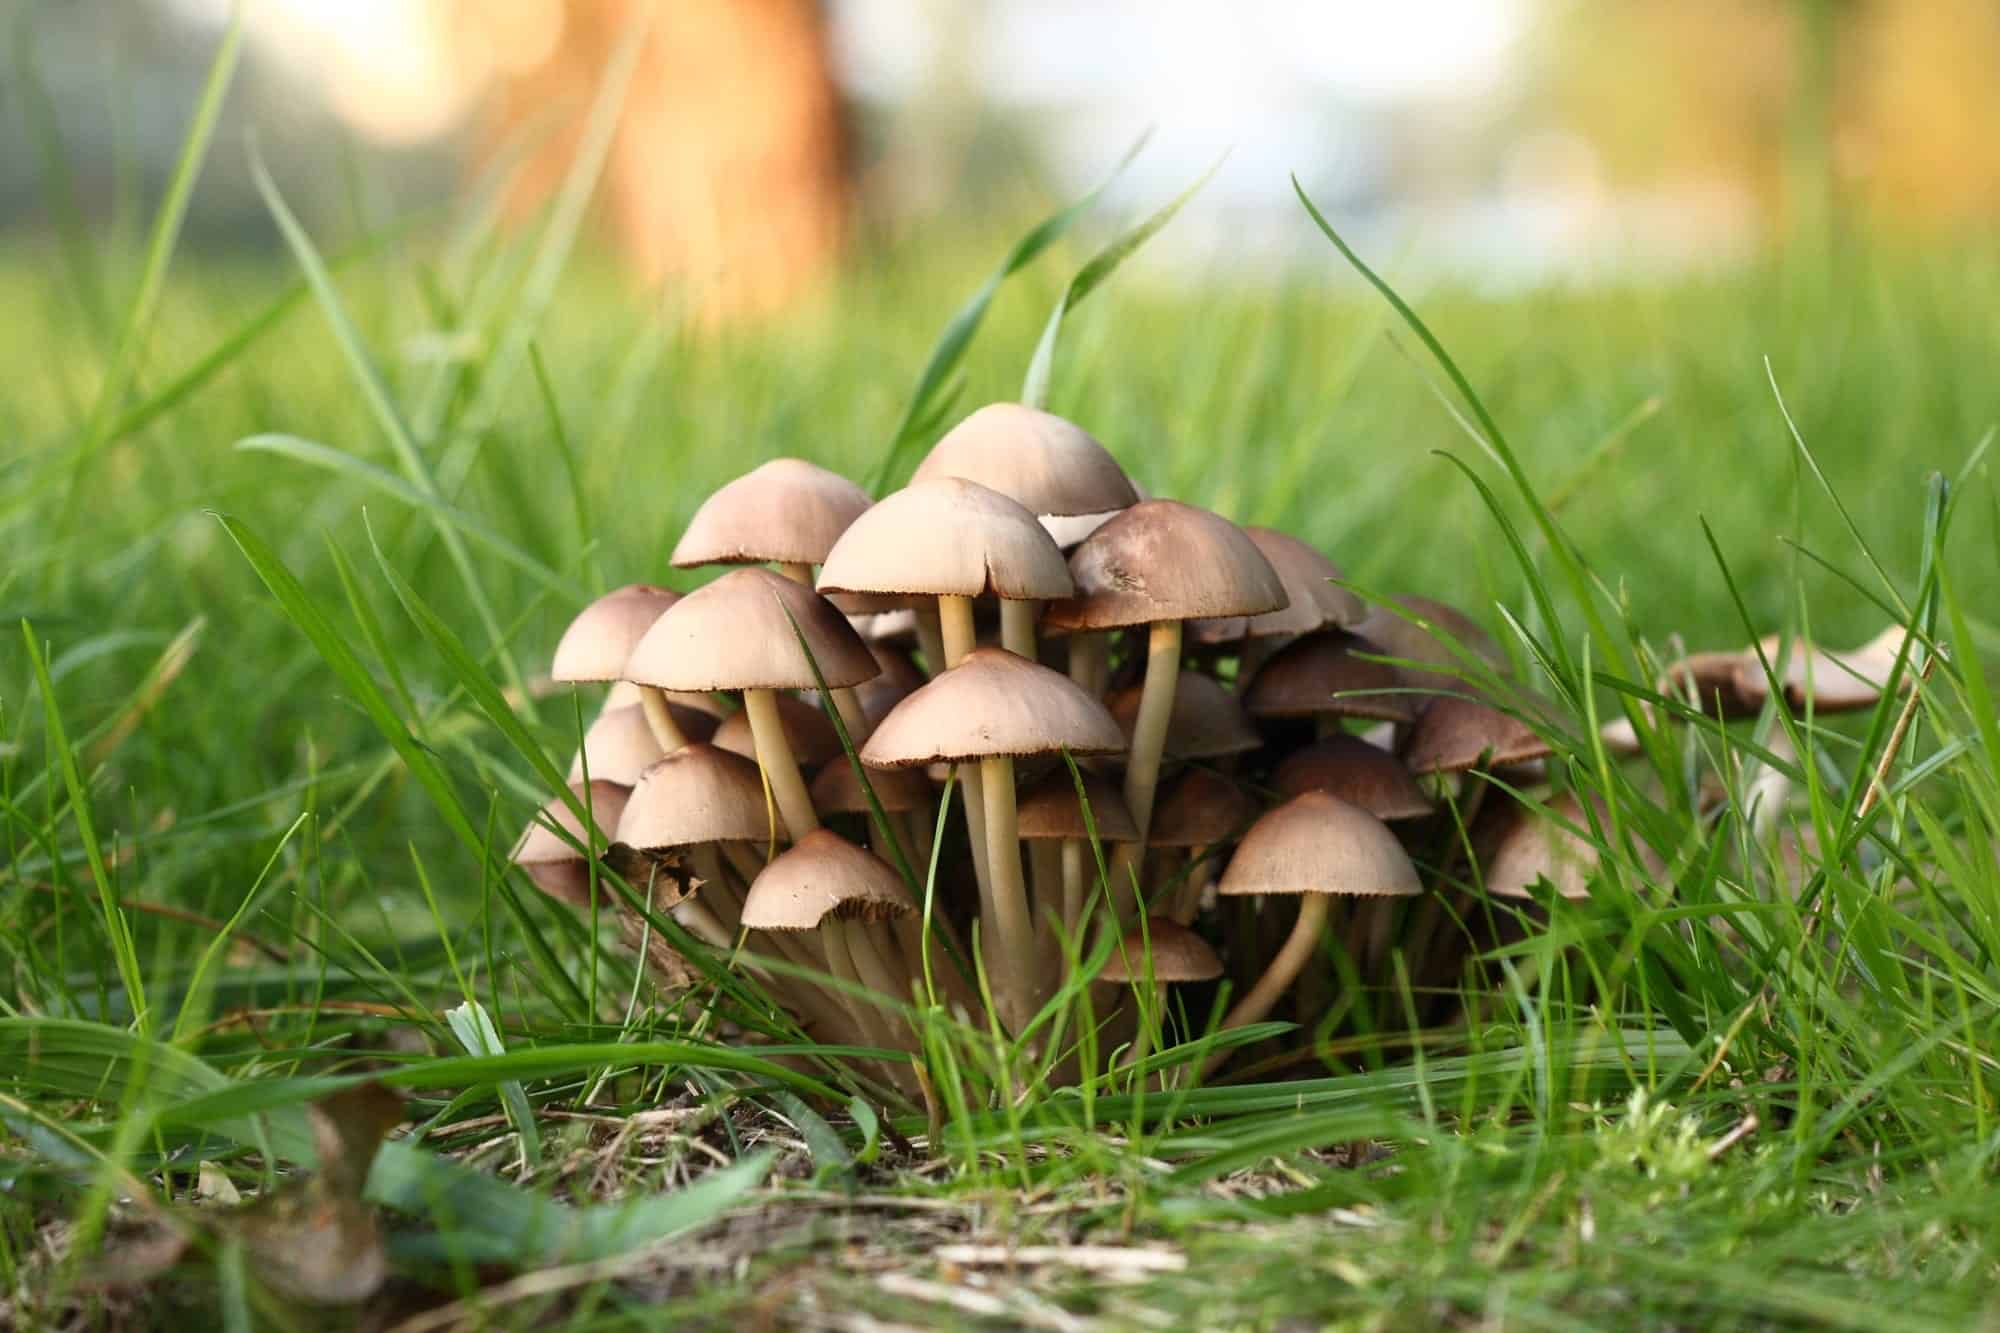 A cluster of mushrooms